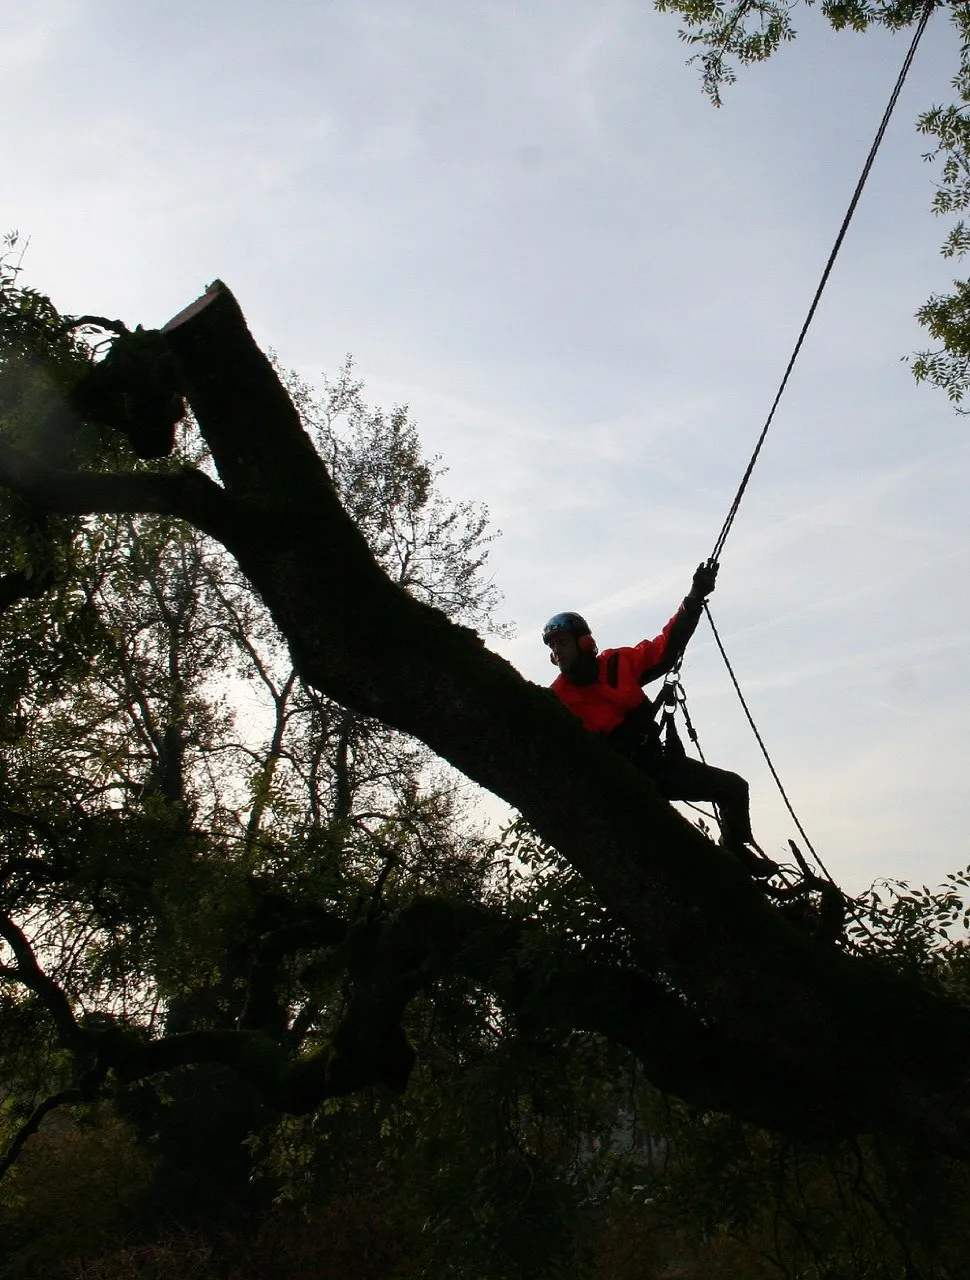 Our team carried out this tree removal at dawn.